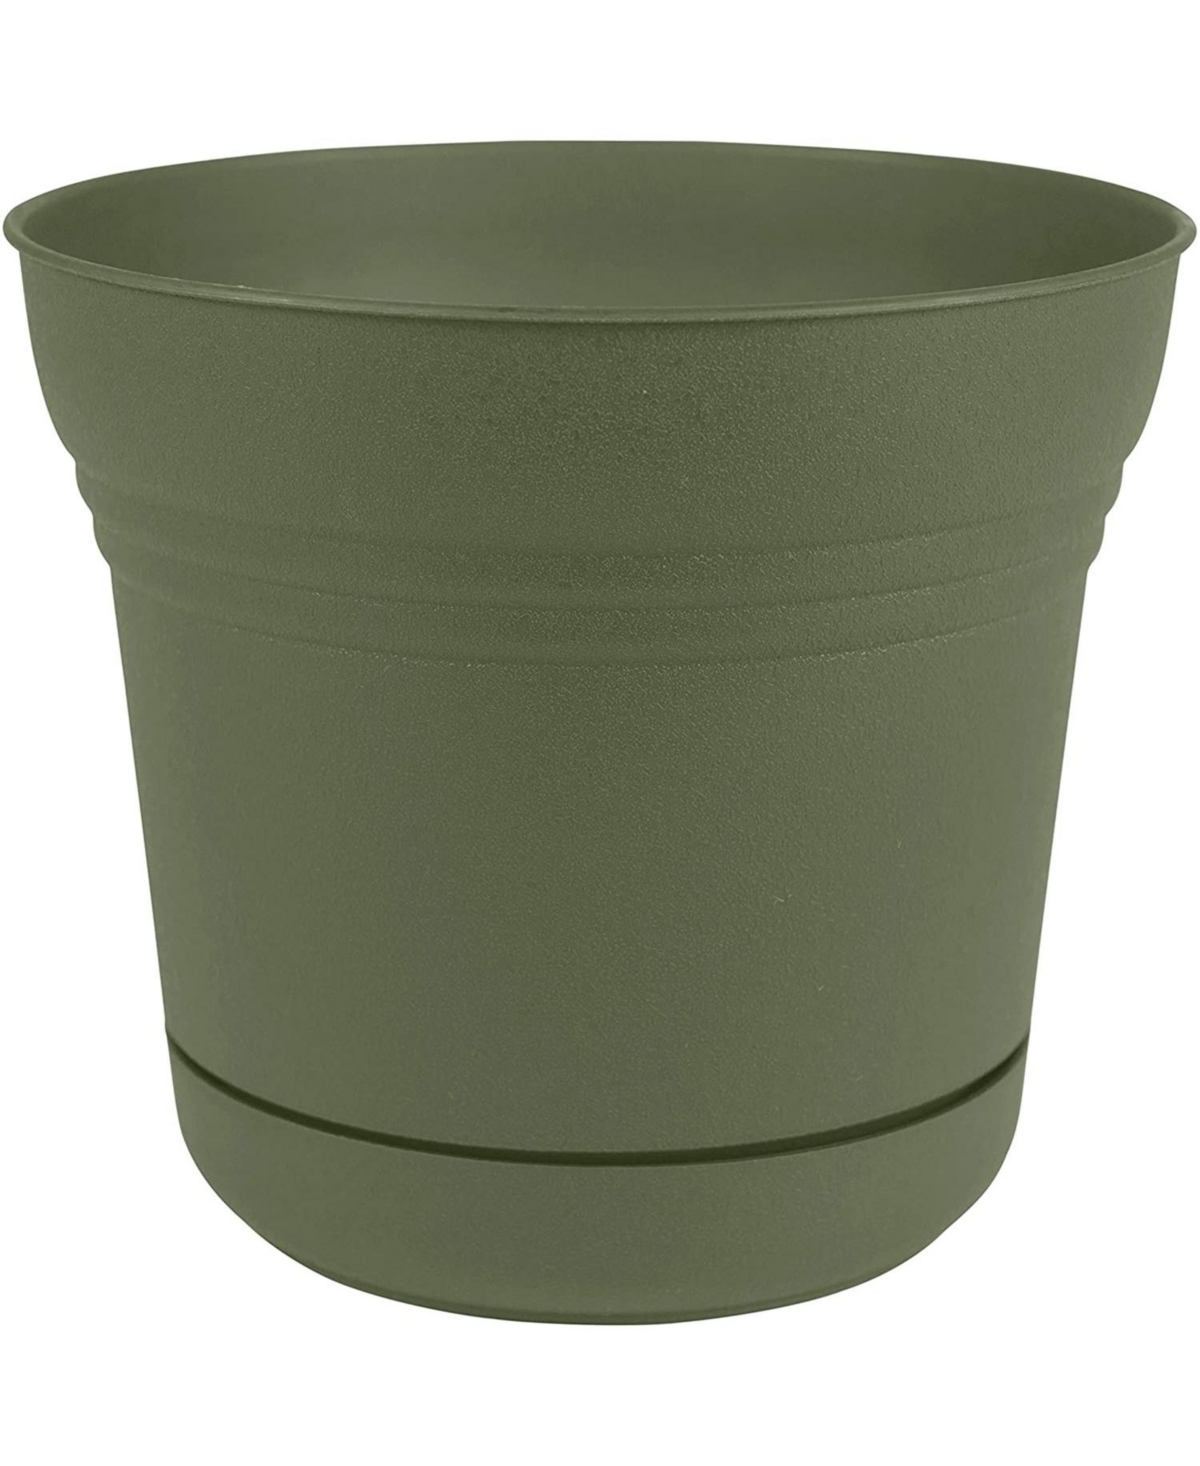 SP0542 Saturn Collection Planter with Saucer, Living Green - 5 inches - Green